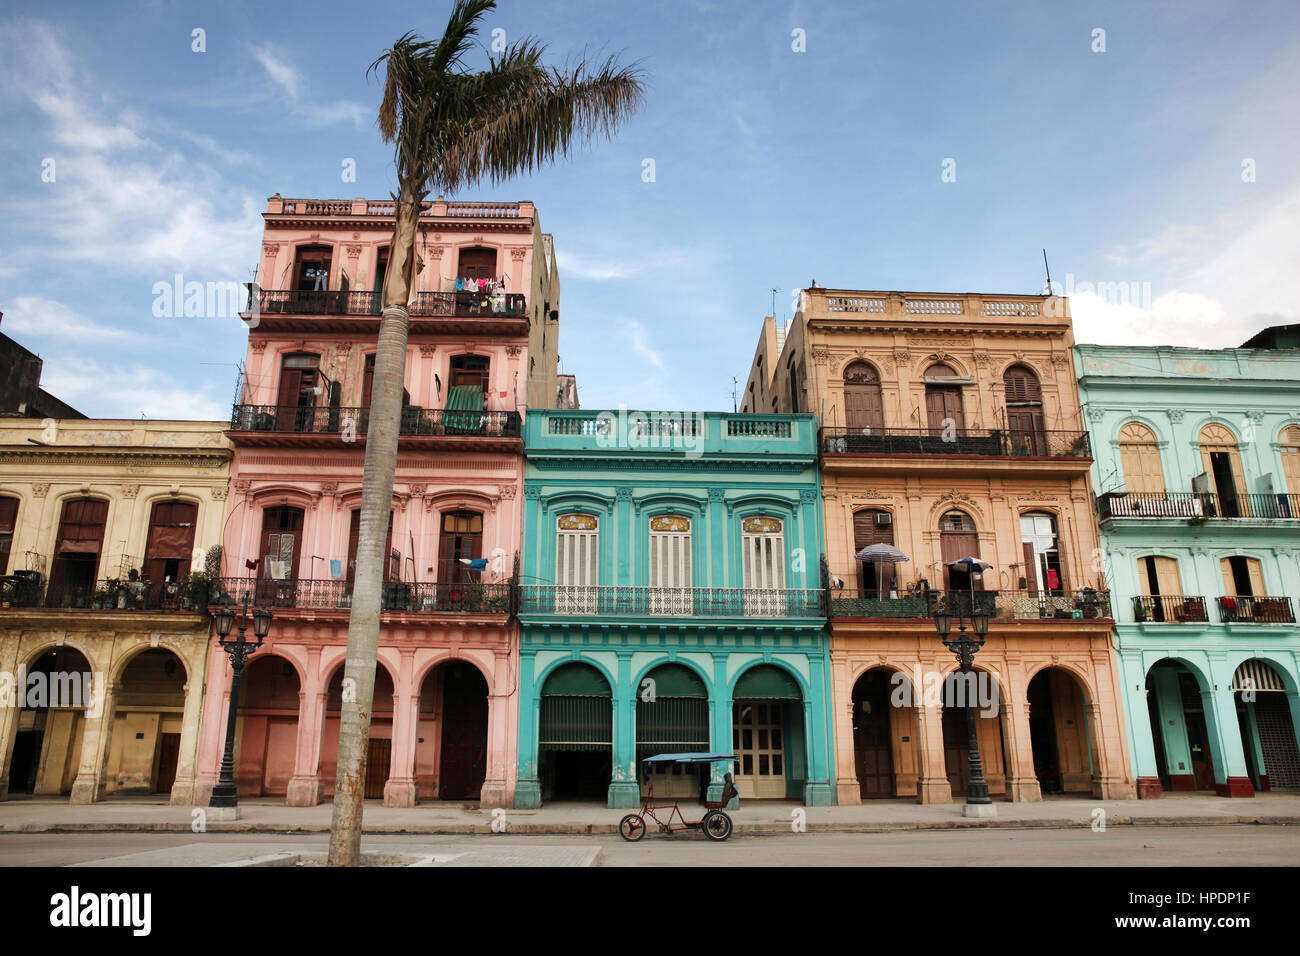 Colorful buildings and historic colonial archtiecture on Paseo del Prado, downtown Havana, Cuba. Stock Photo